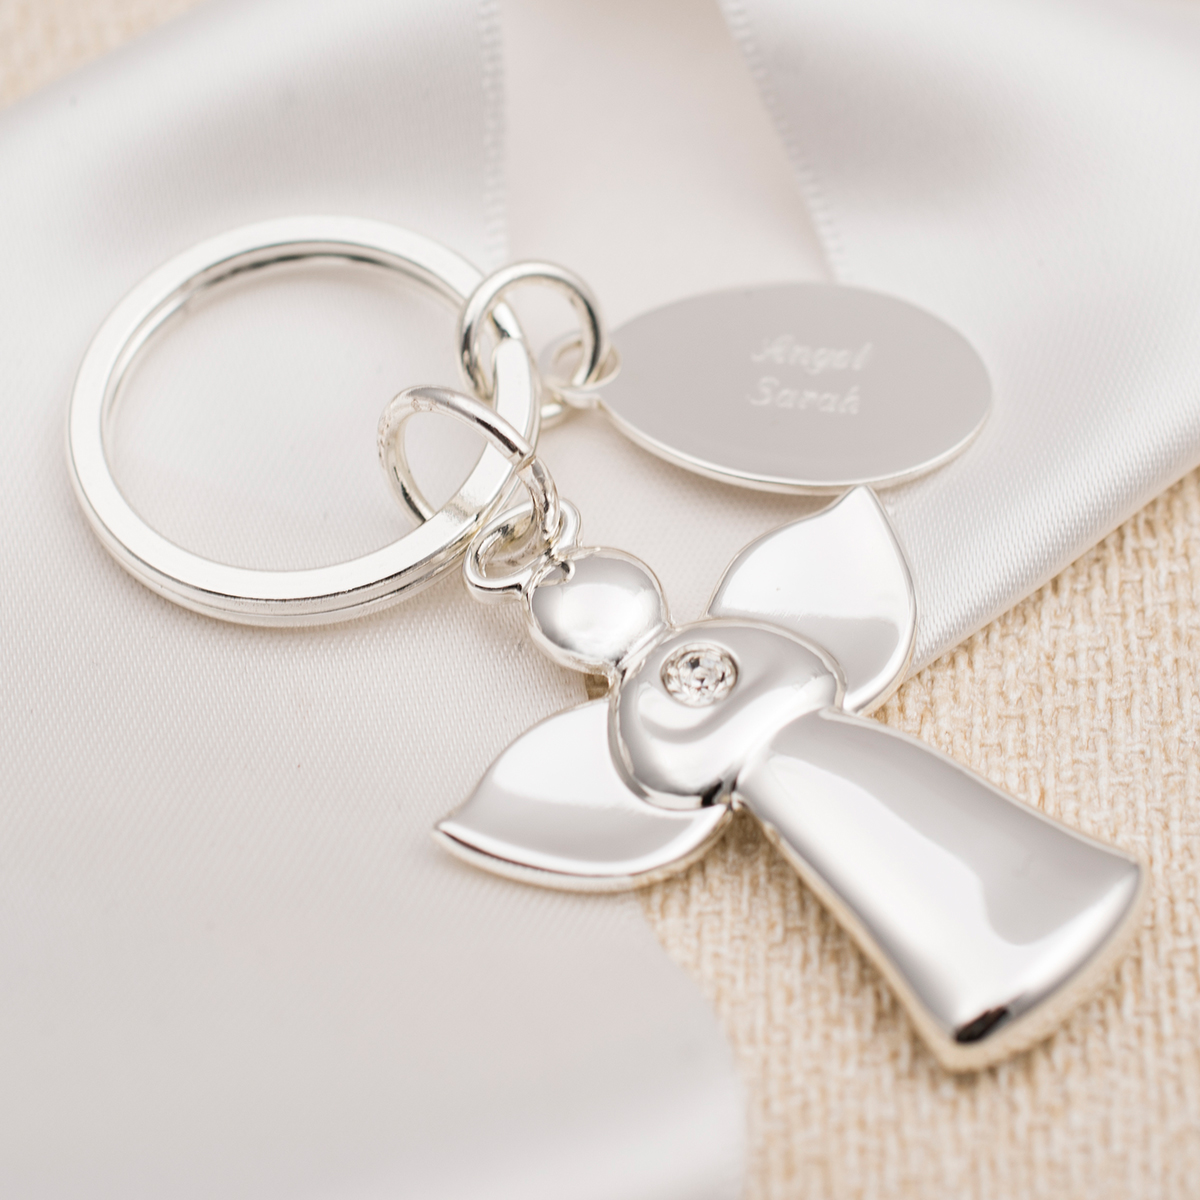 Engraved Guardian Angel Silver-Plated Key Ring